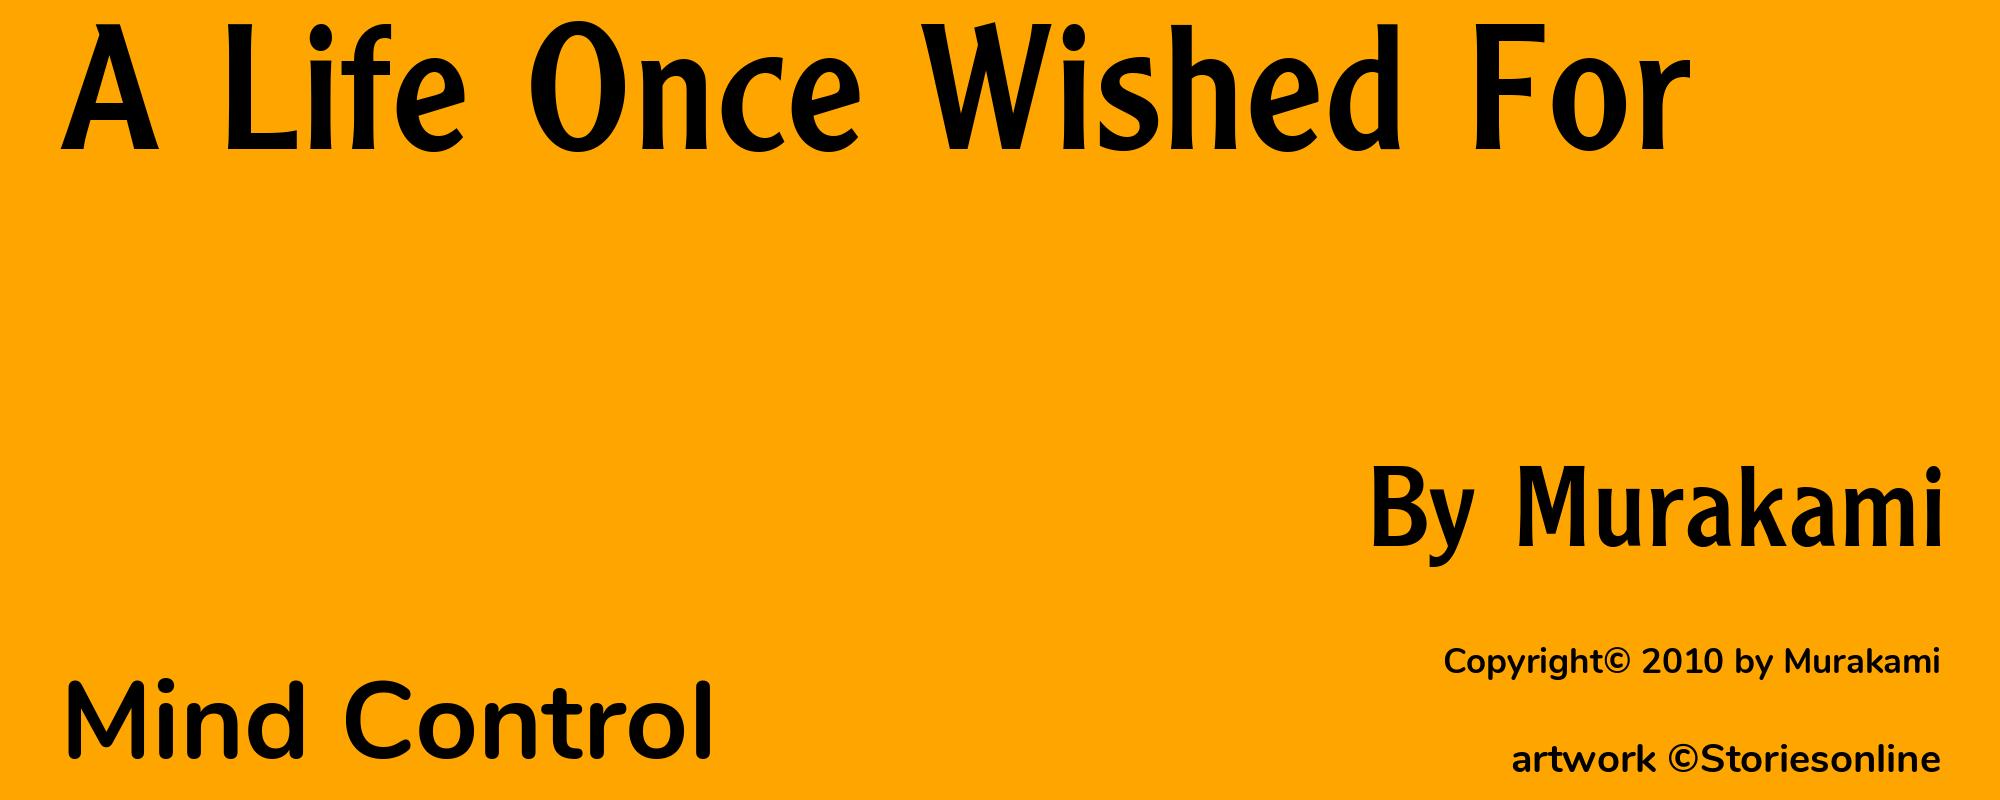 A Life Once Wished For - Cover